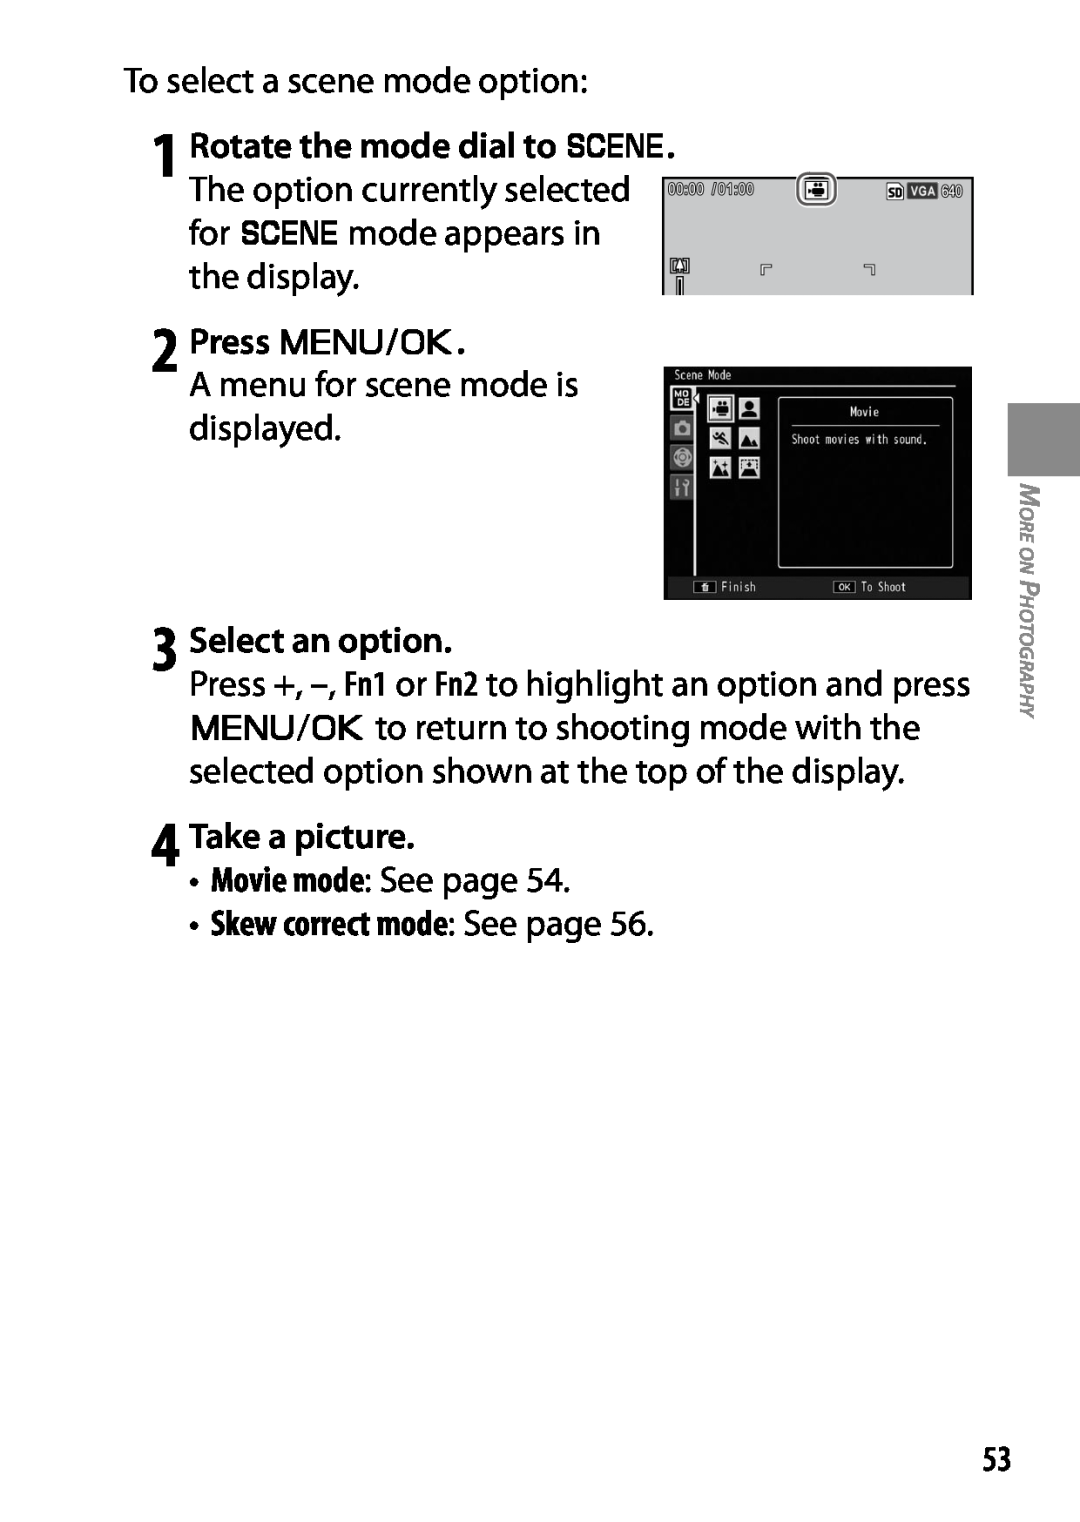 Ricoh 170553, GXR 1 Rotate the mode dial to, 2 Press C/D, 3 Select an option, Skew correct mode See page, 4 Take a picture 